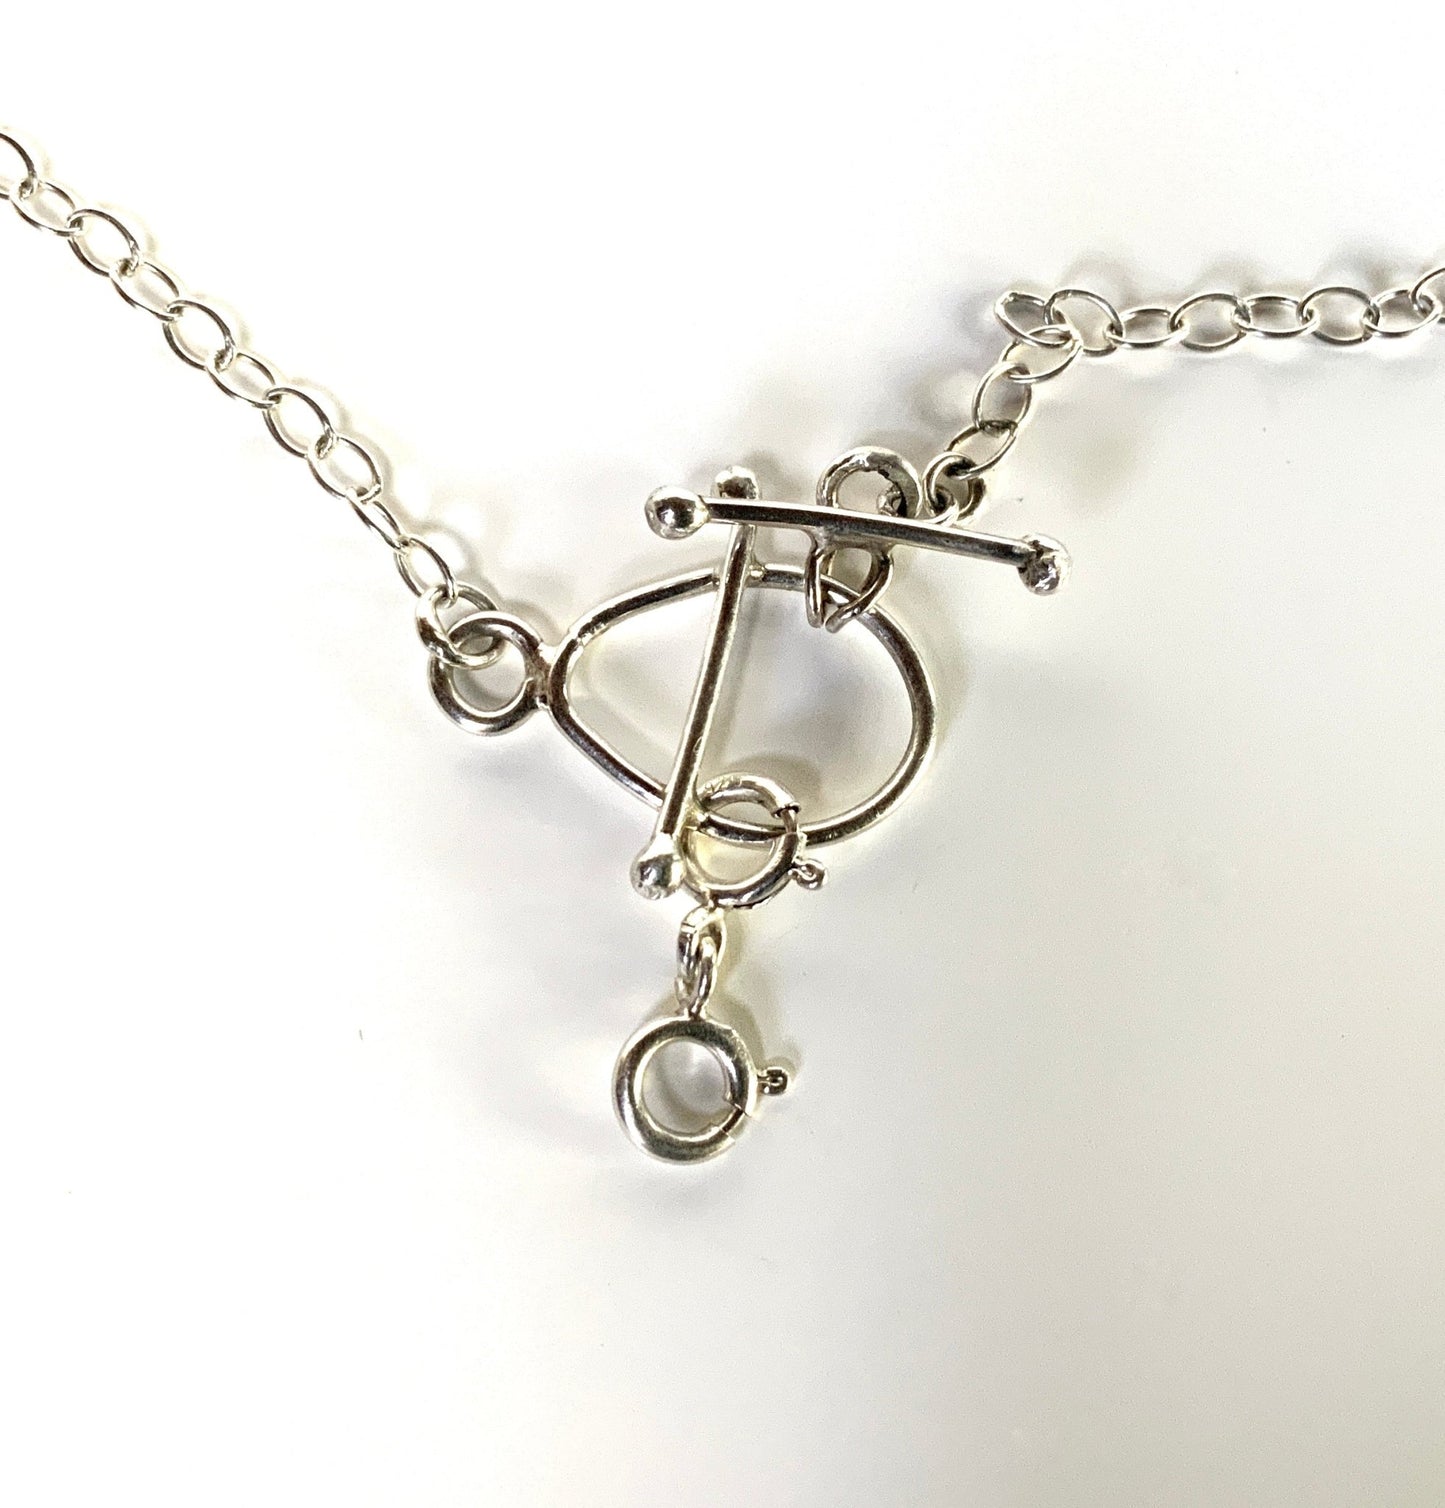 Toggle Necklace Sterling Silver - Evitts Creek Arts